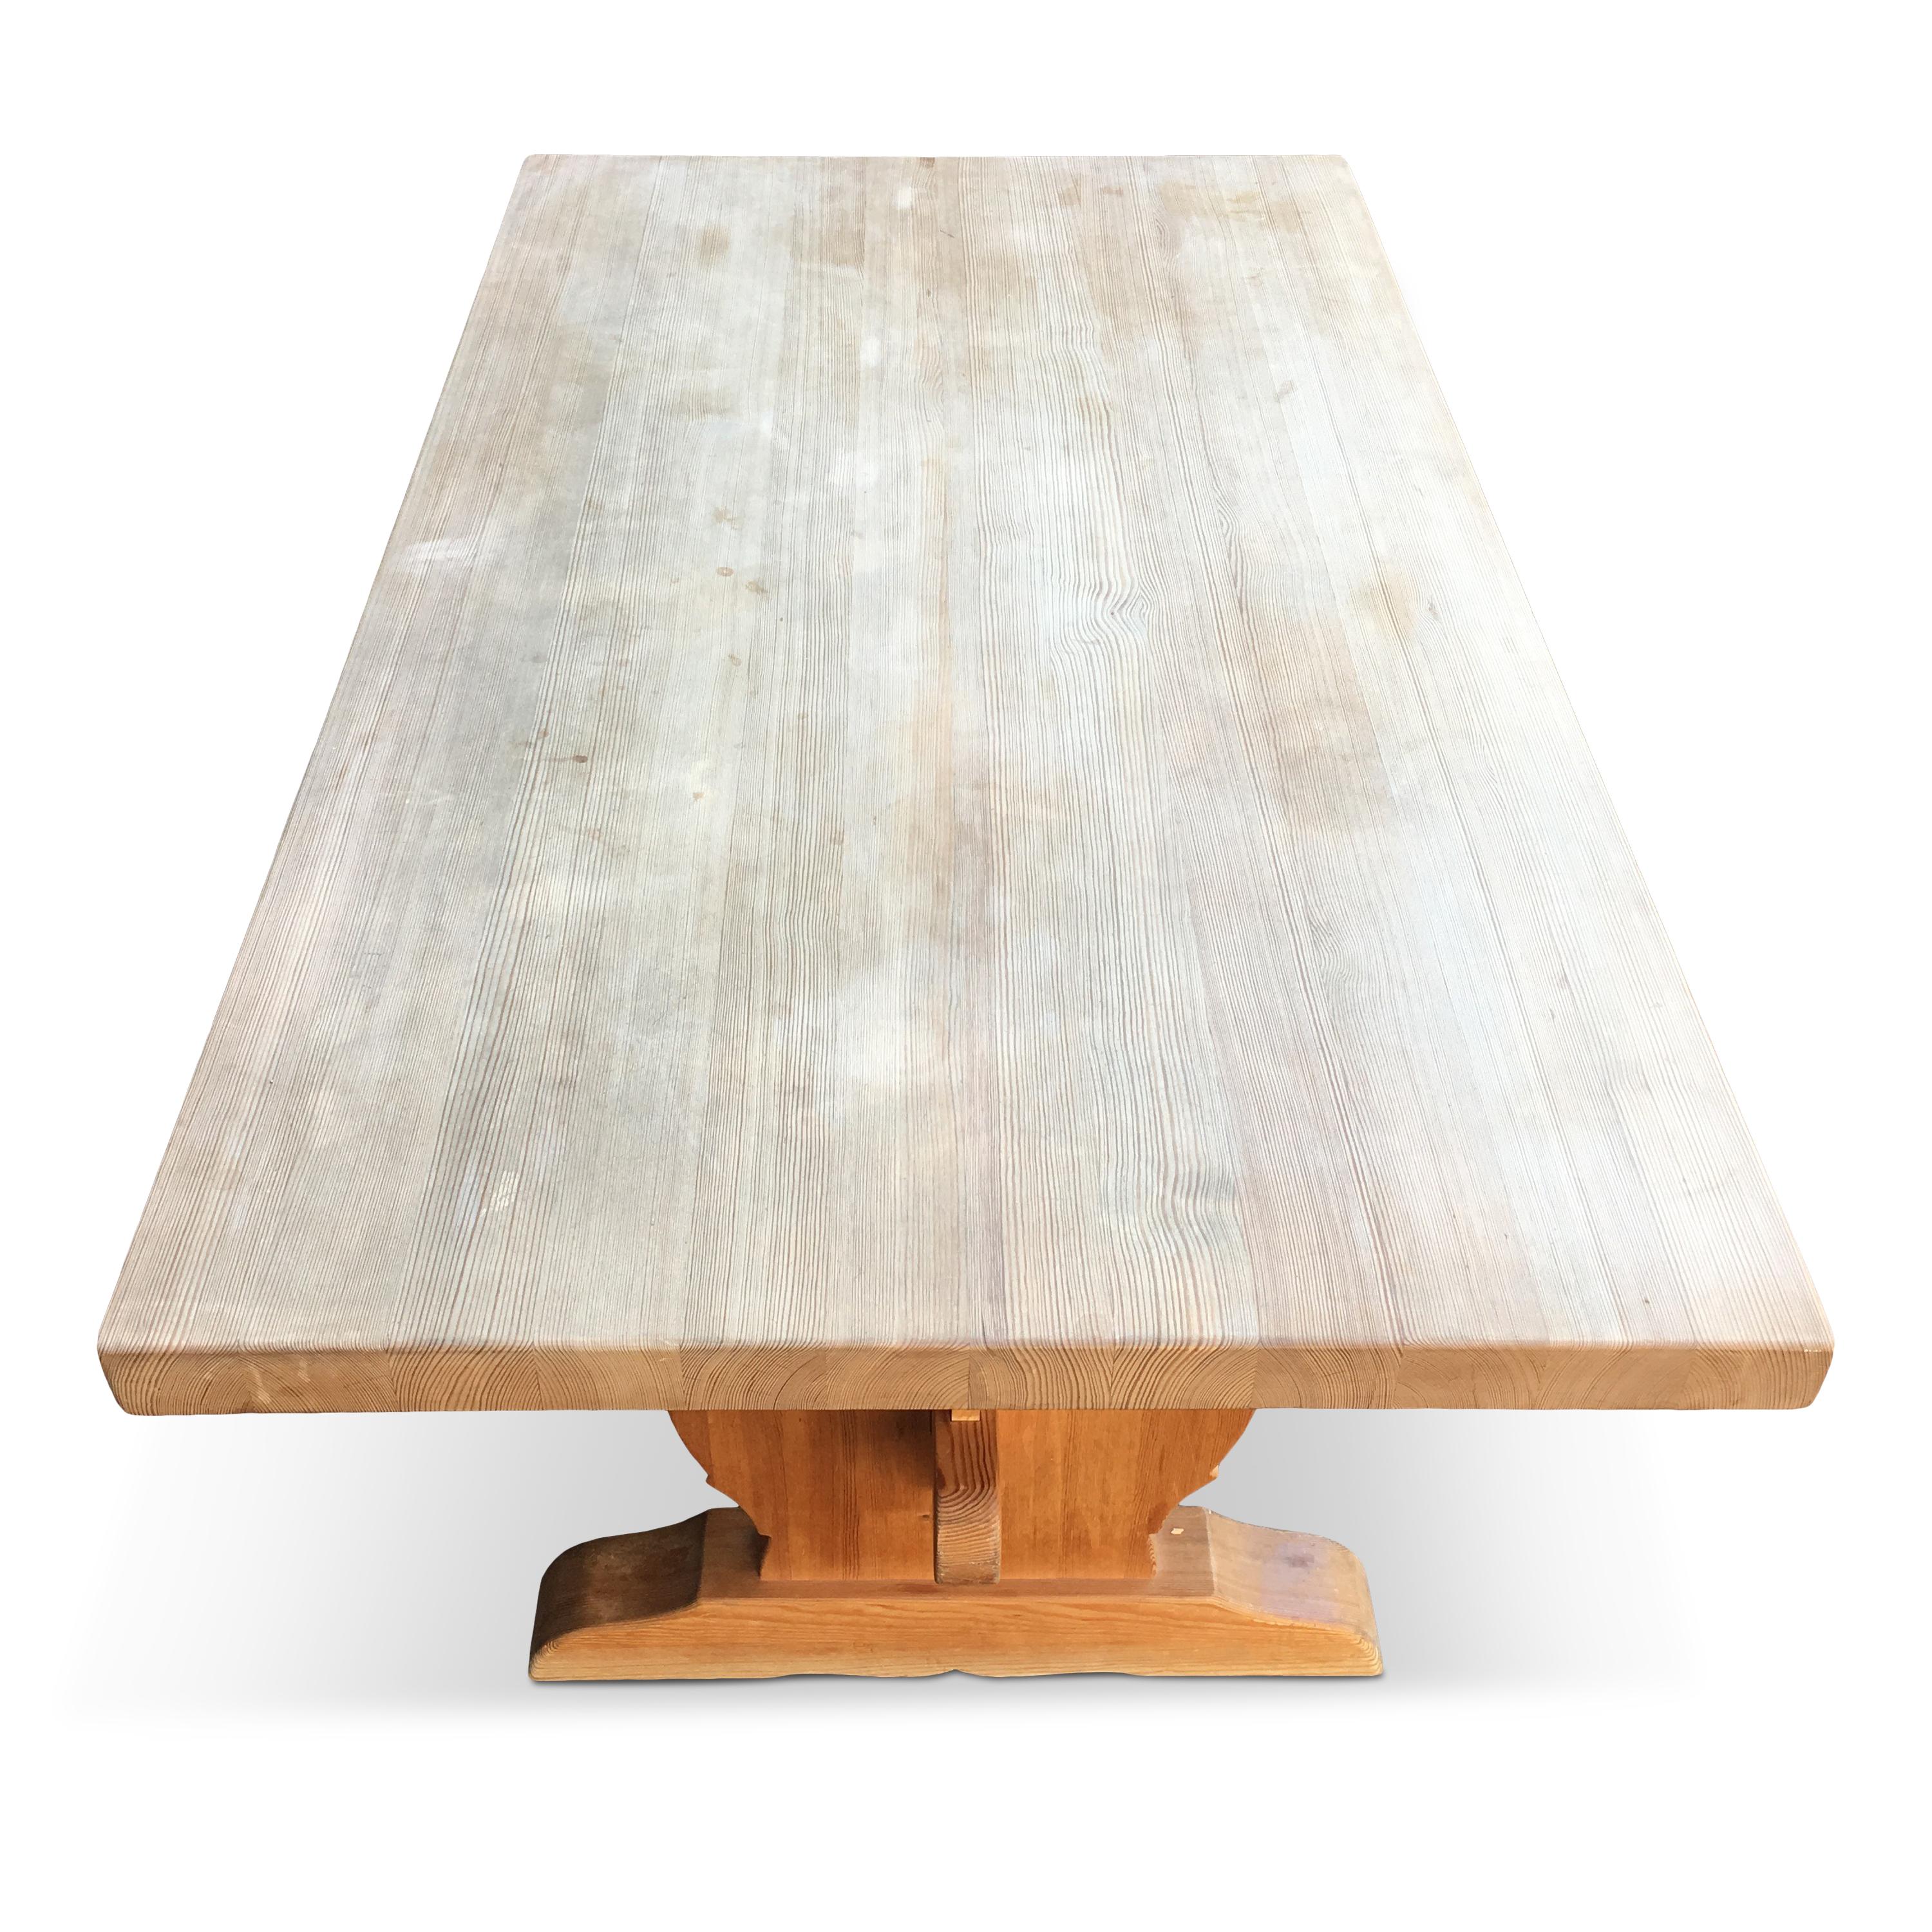 Midcentury Swedish Trestle Pine Dining Table In Good Condition For Sale In Riga, Latvia